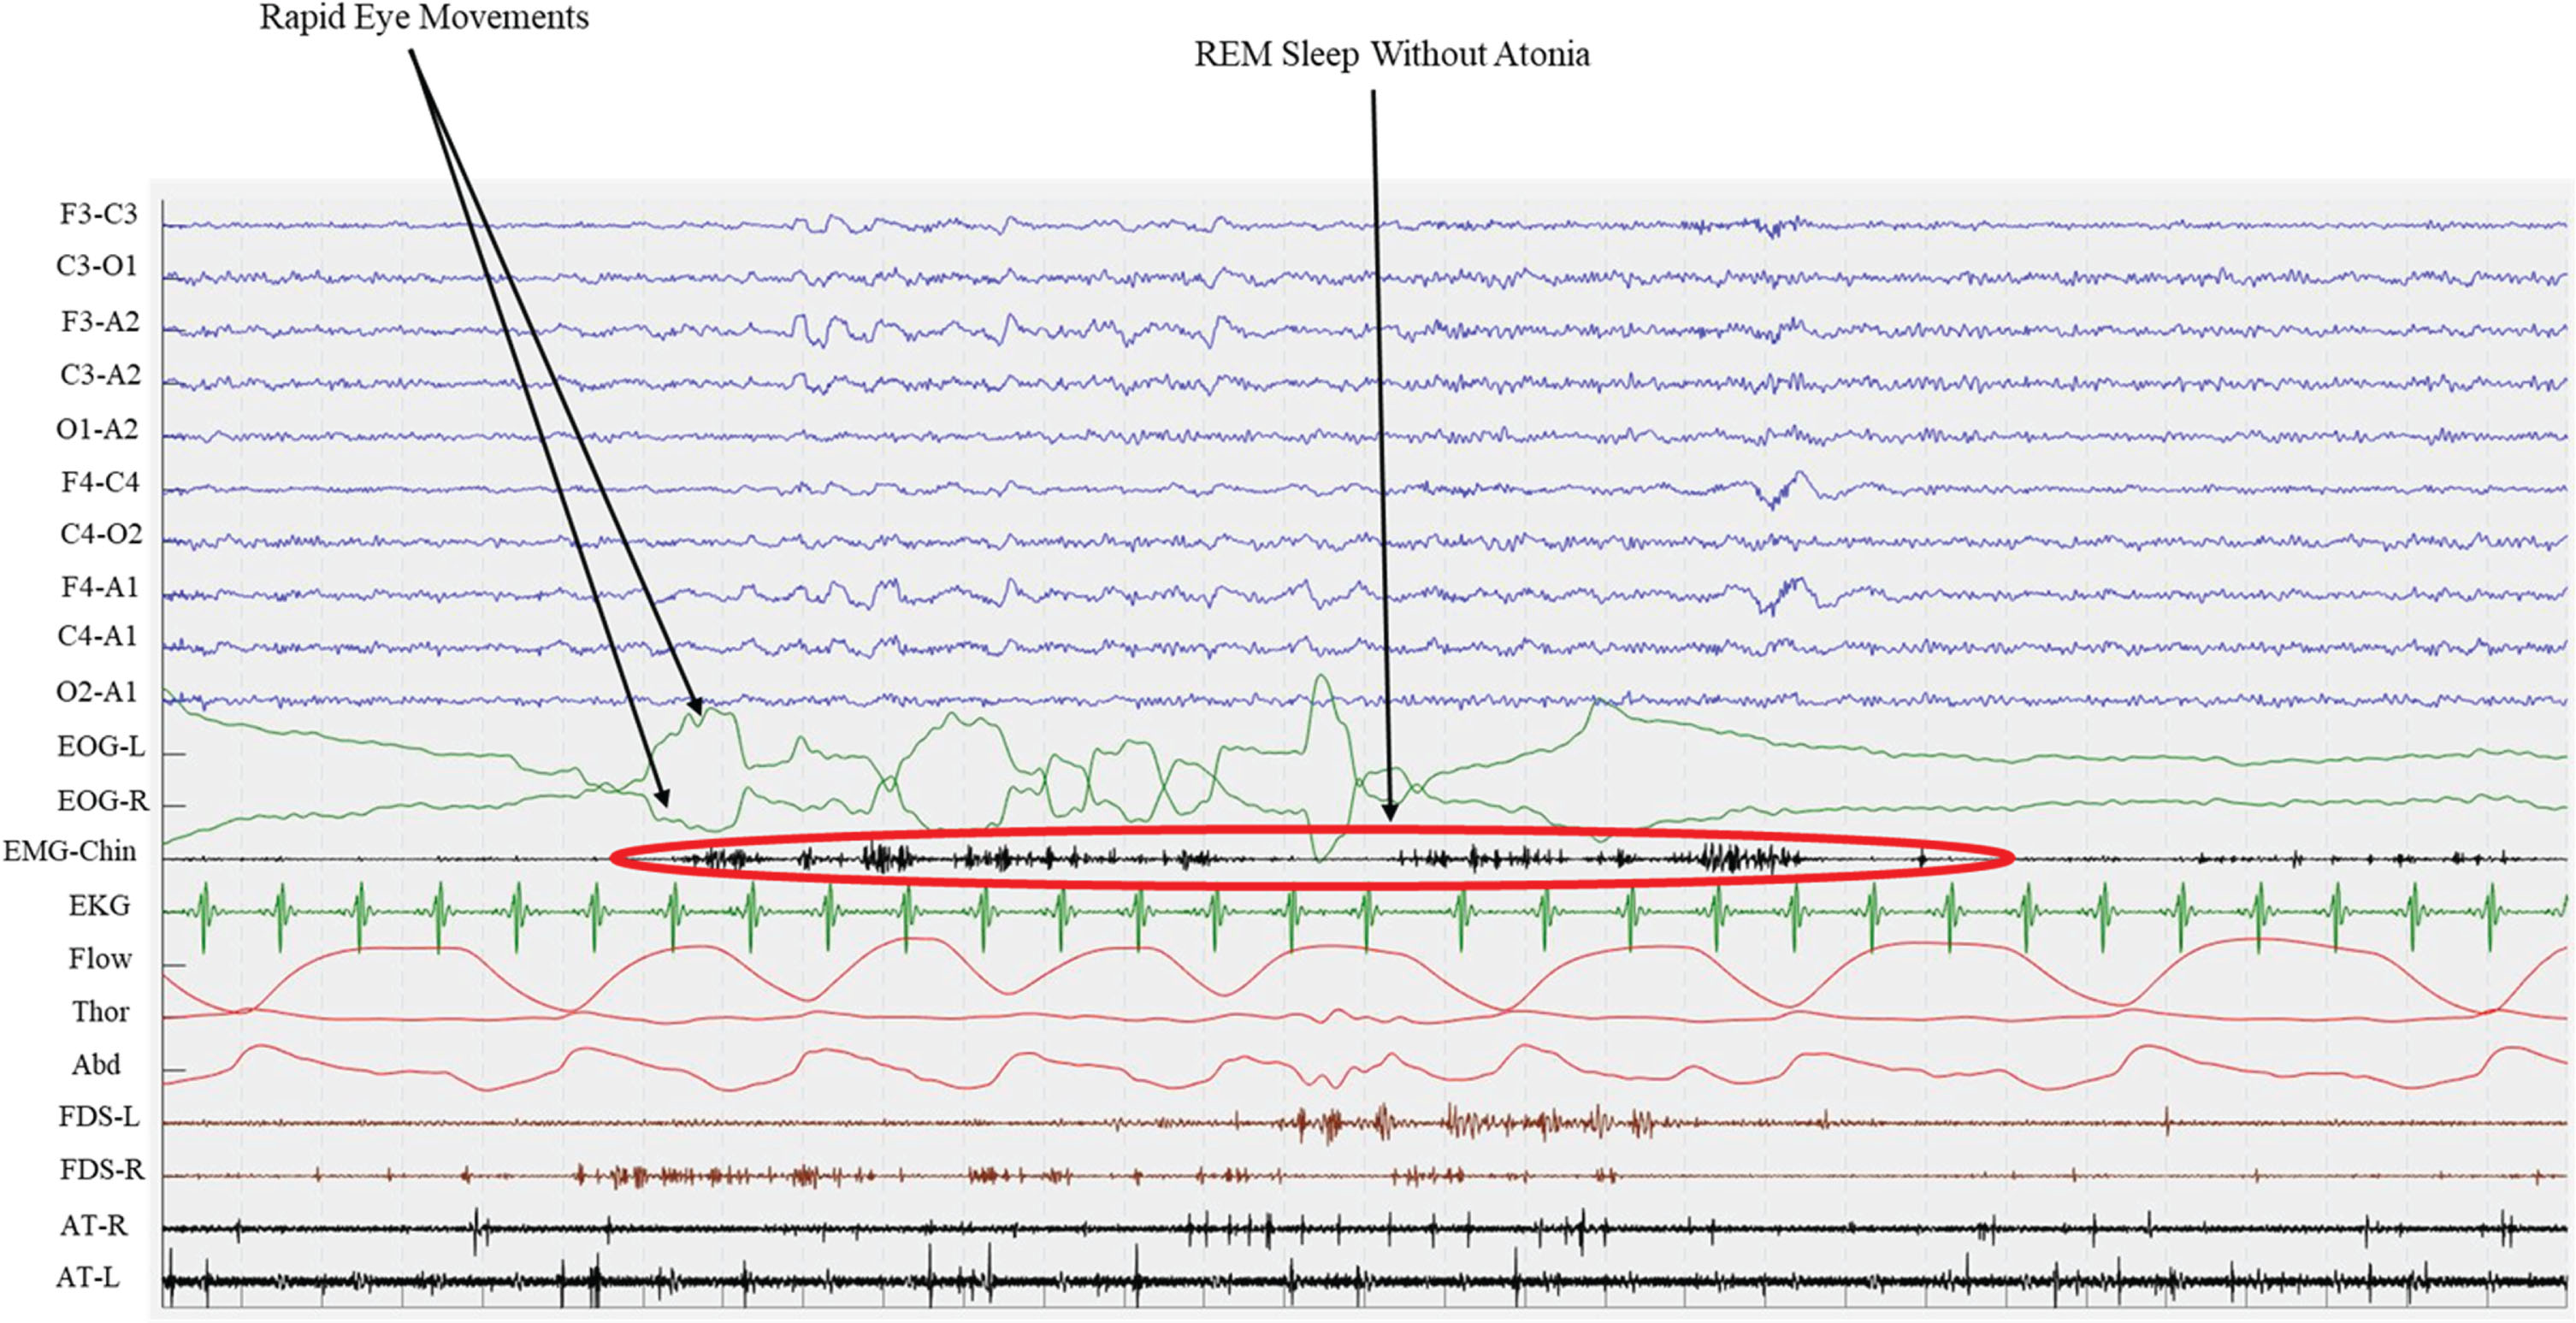 Polysomnographic epoch of an iRBD patients. Green lines (EOG-L and EOG-R) shows Rapid Eye Movements both for left and right eyes, while EMG records chin muscle activity. This recording shows the presence of REM Sleep Without Atonia (RWA) during REM sleep. EOG, electro-oculogram; EMG, electro-myogram; EKG, electro-cardiogram; Flow, oro-nasal air flow; Thor, thoracic effort; Abd, abdominal effort; FDS, flexor digitorum superficialis; AT, anterior tibialis; L, left; R, right.